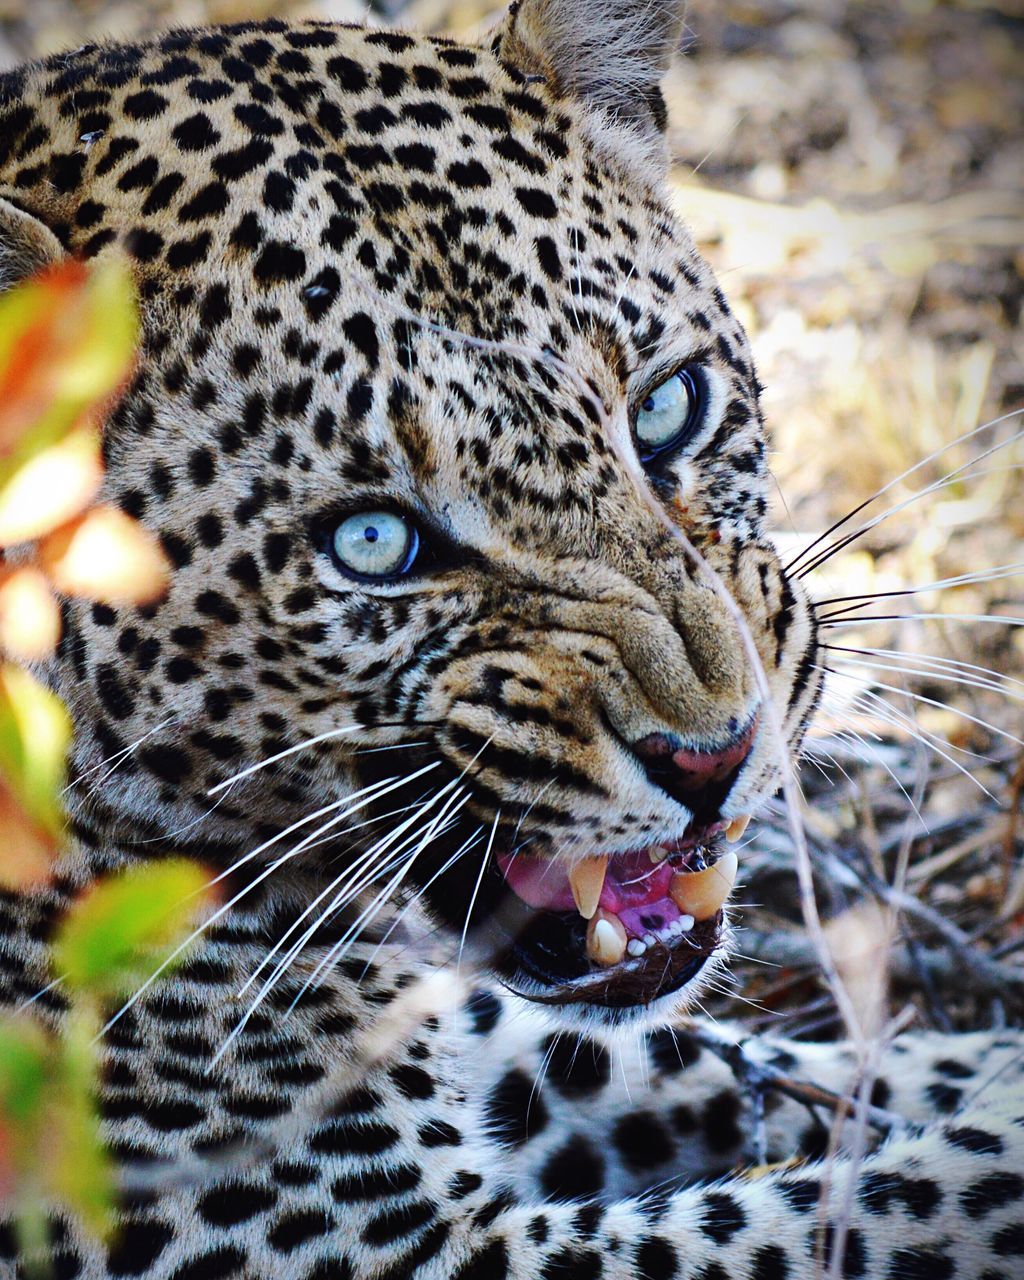 one animal, animal themes, mouth open, no people, outdoors, close-up, mammal, leopard, day, animals in the wild, feline, animal tongue, pets, nature, domestic animals, angry, yawning